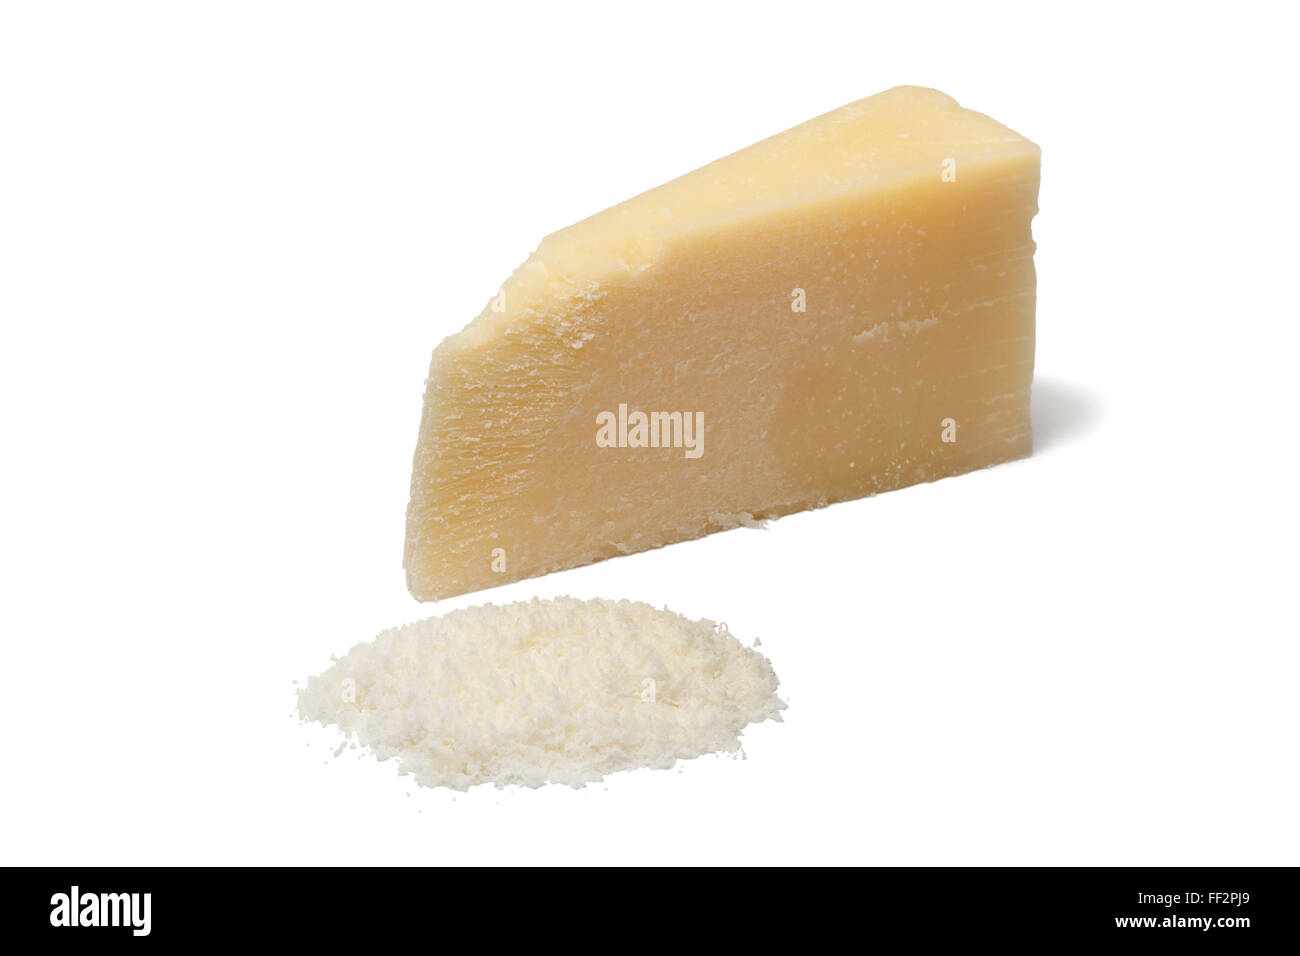 Portion and grated Parmesan cheese on white background Stock Photo